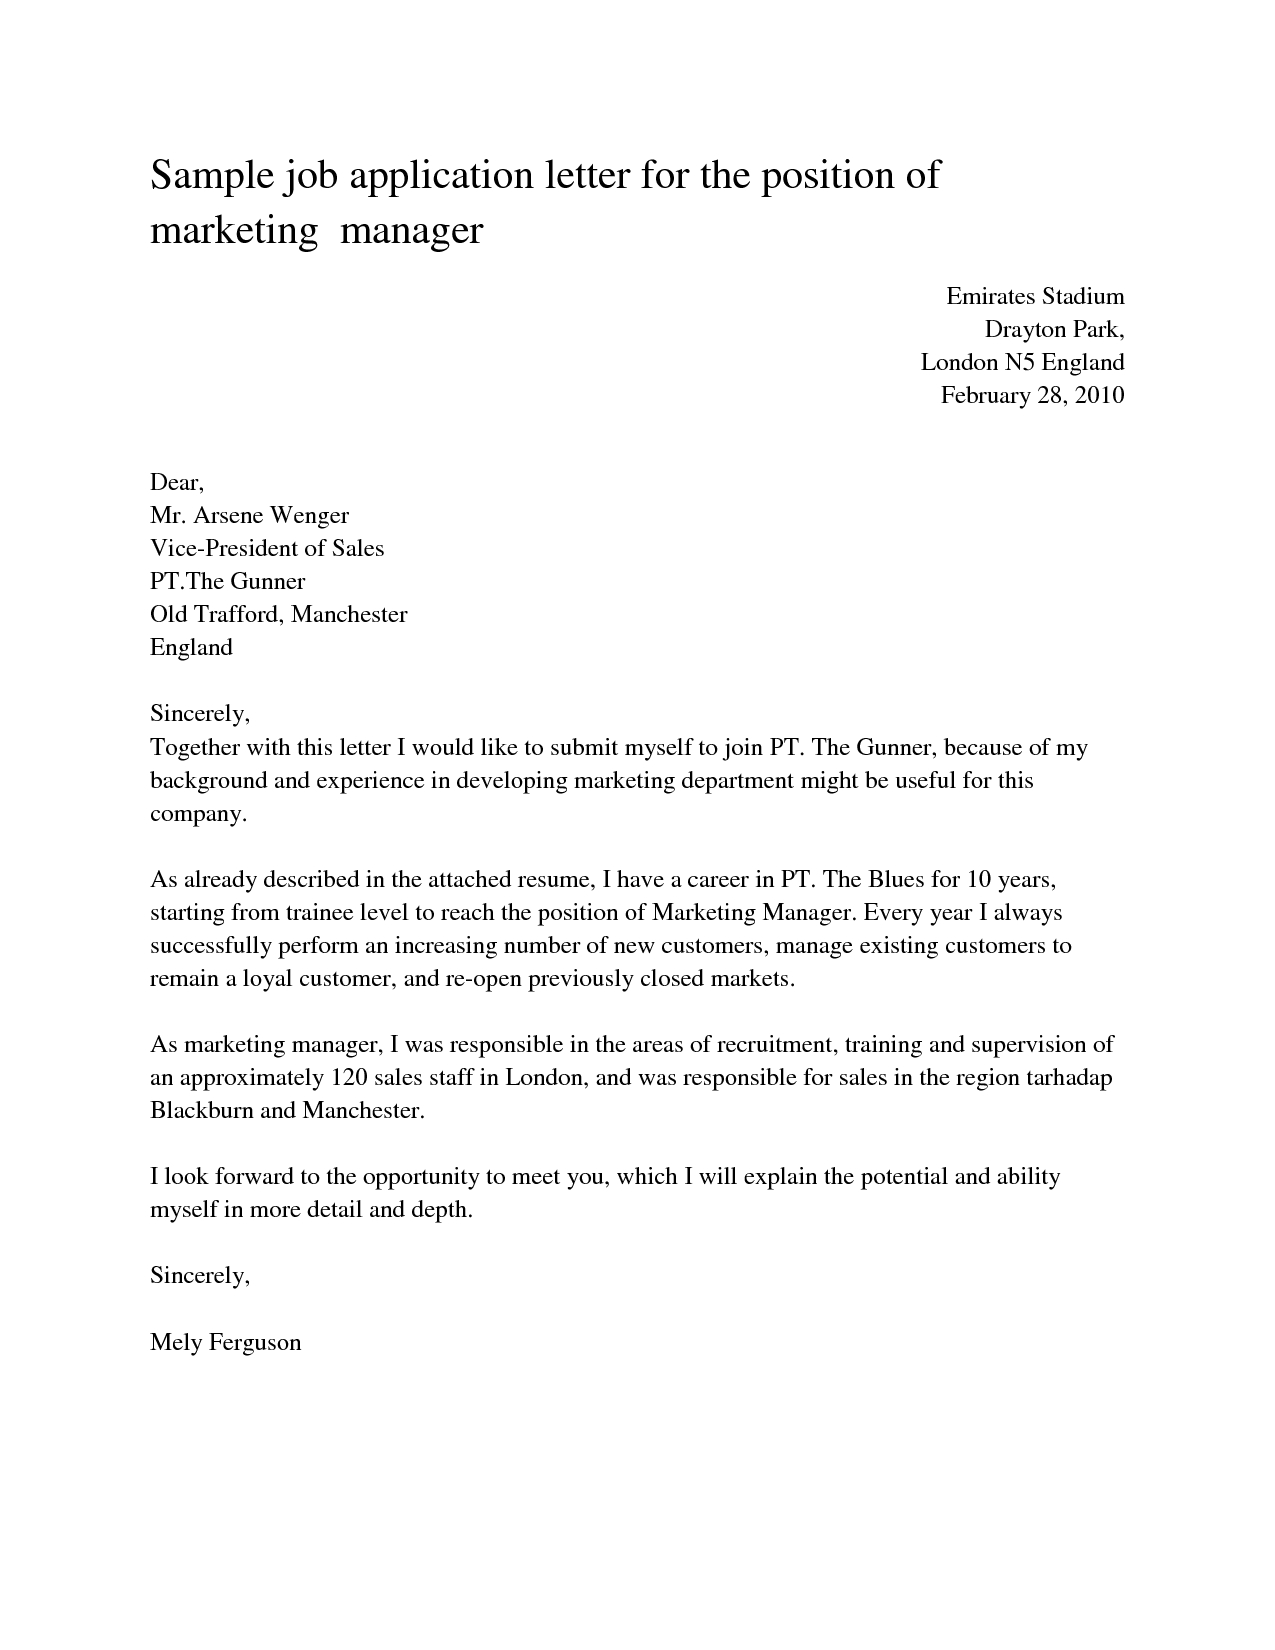 Recommendation Letter For On The Job Training Debandje within dimensions 1275 X 1650